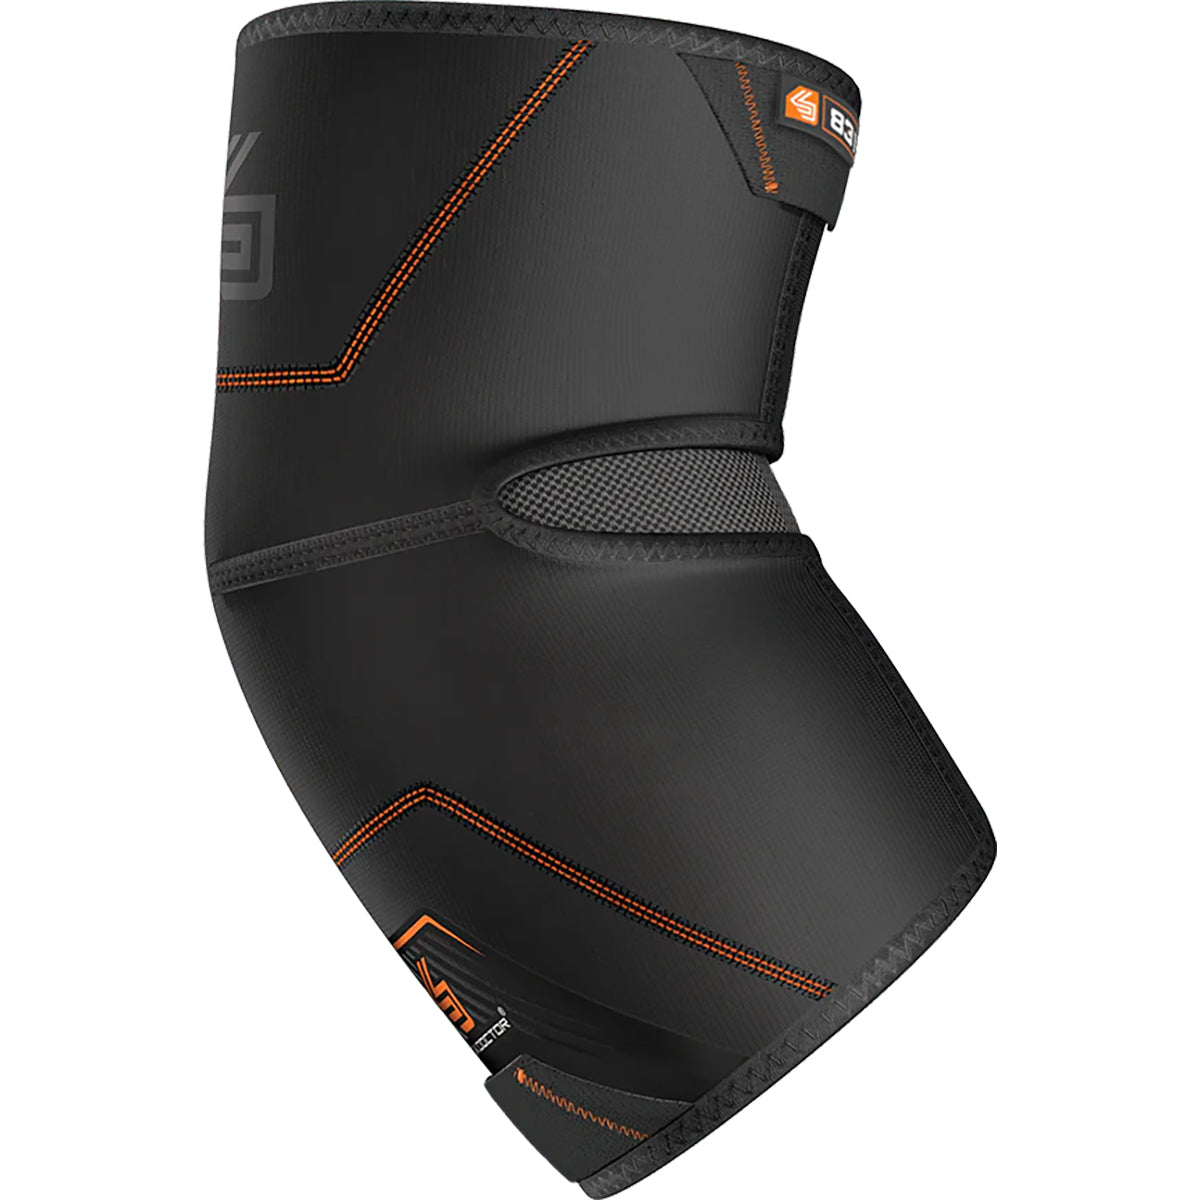 Shock Doctor Elbow Compression Sleeve with Extended Coverage - Black Shock Doctor